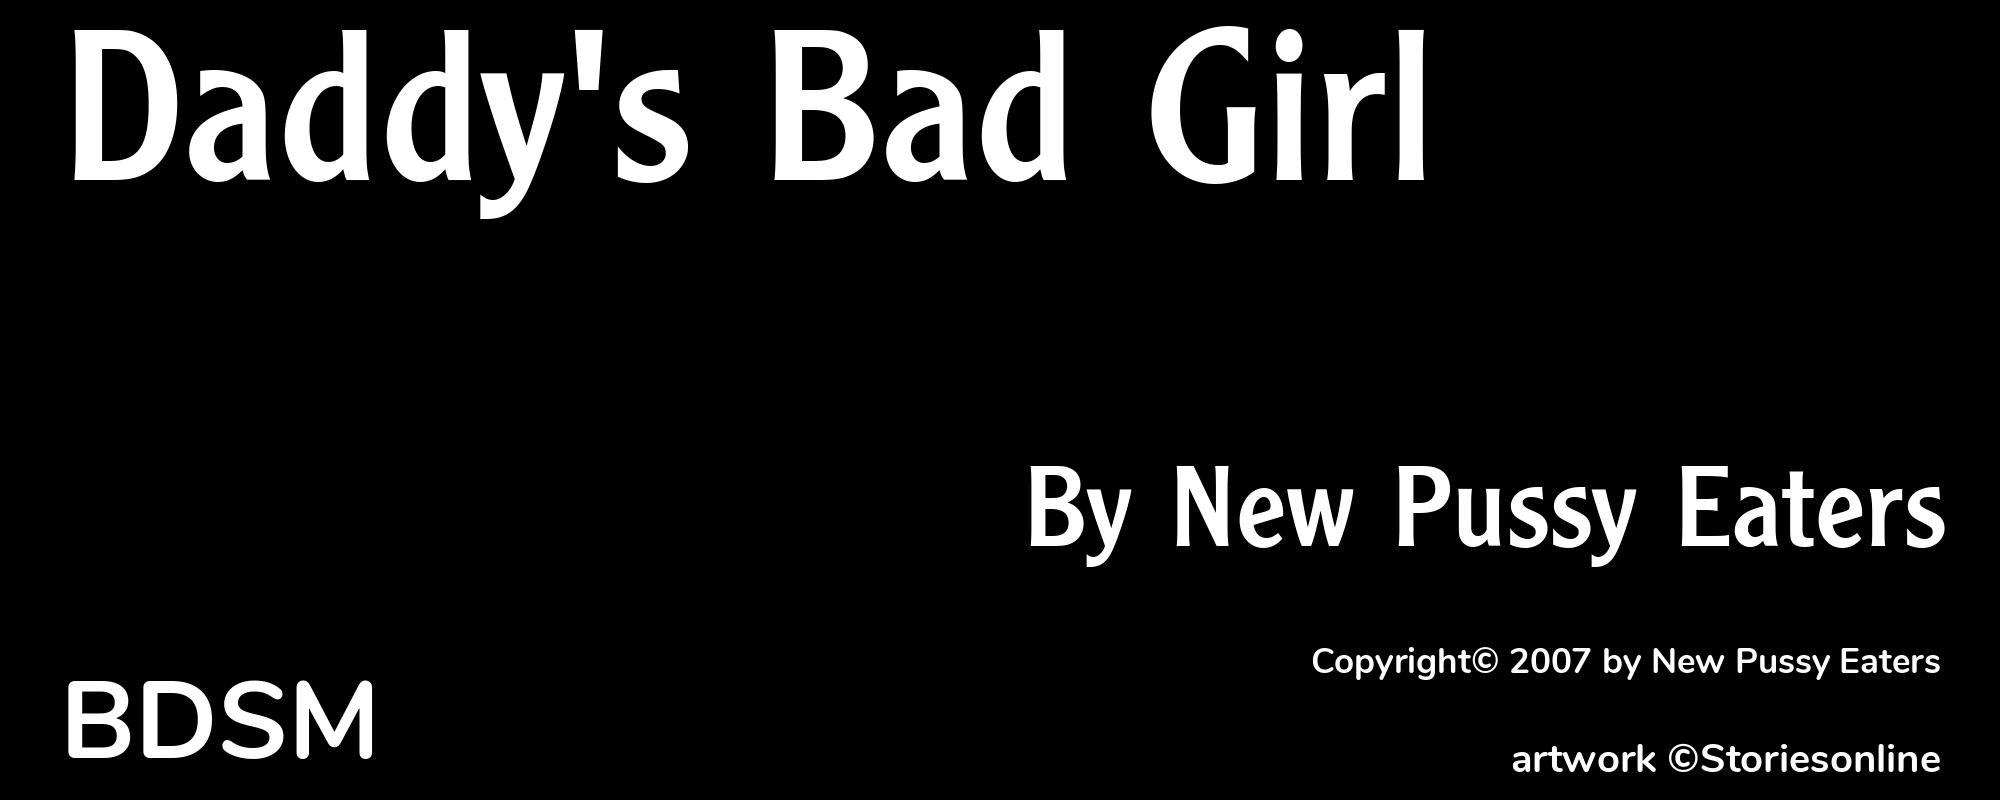 Daddy's Bad Girl - Cover